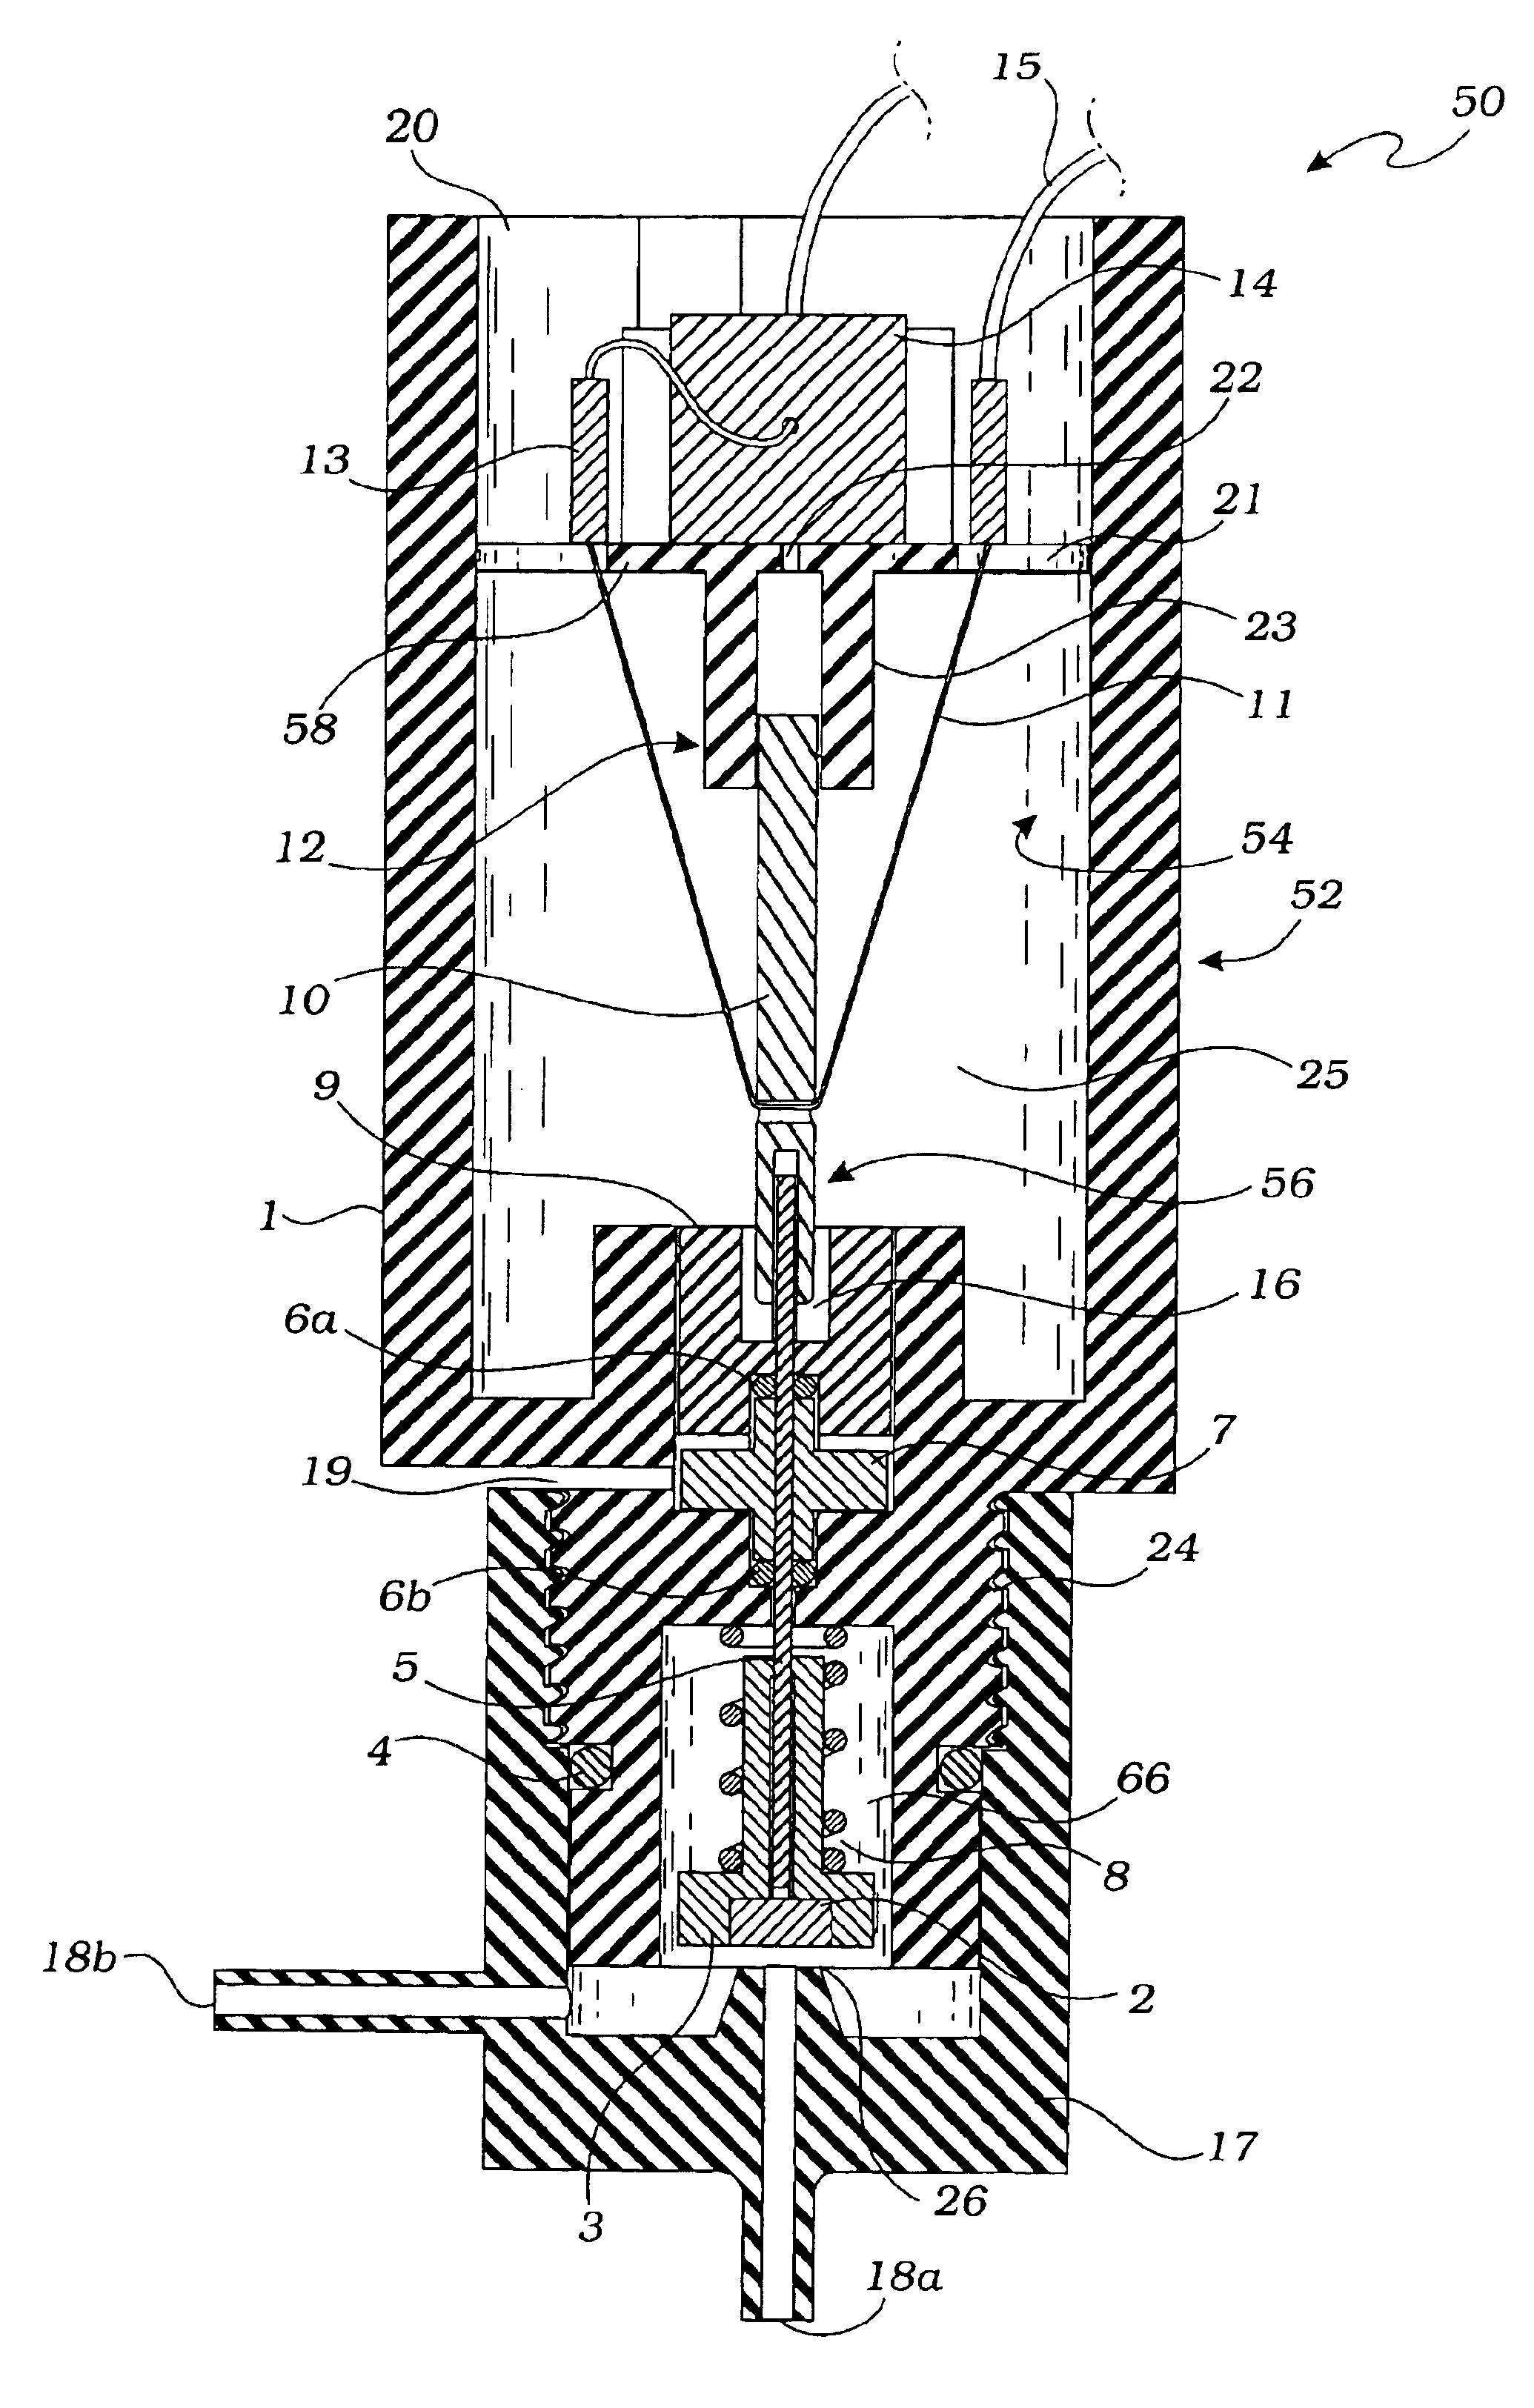 Memory wire actuated control valve